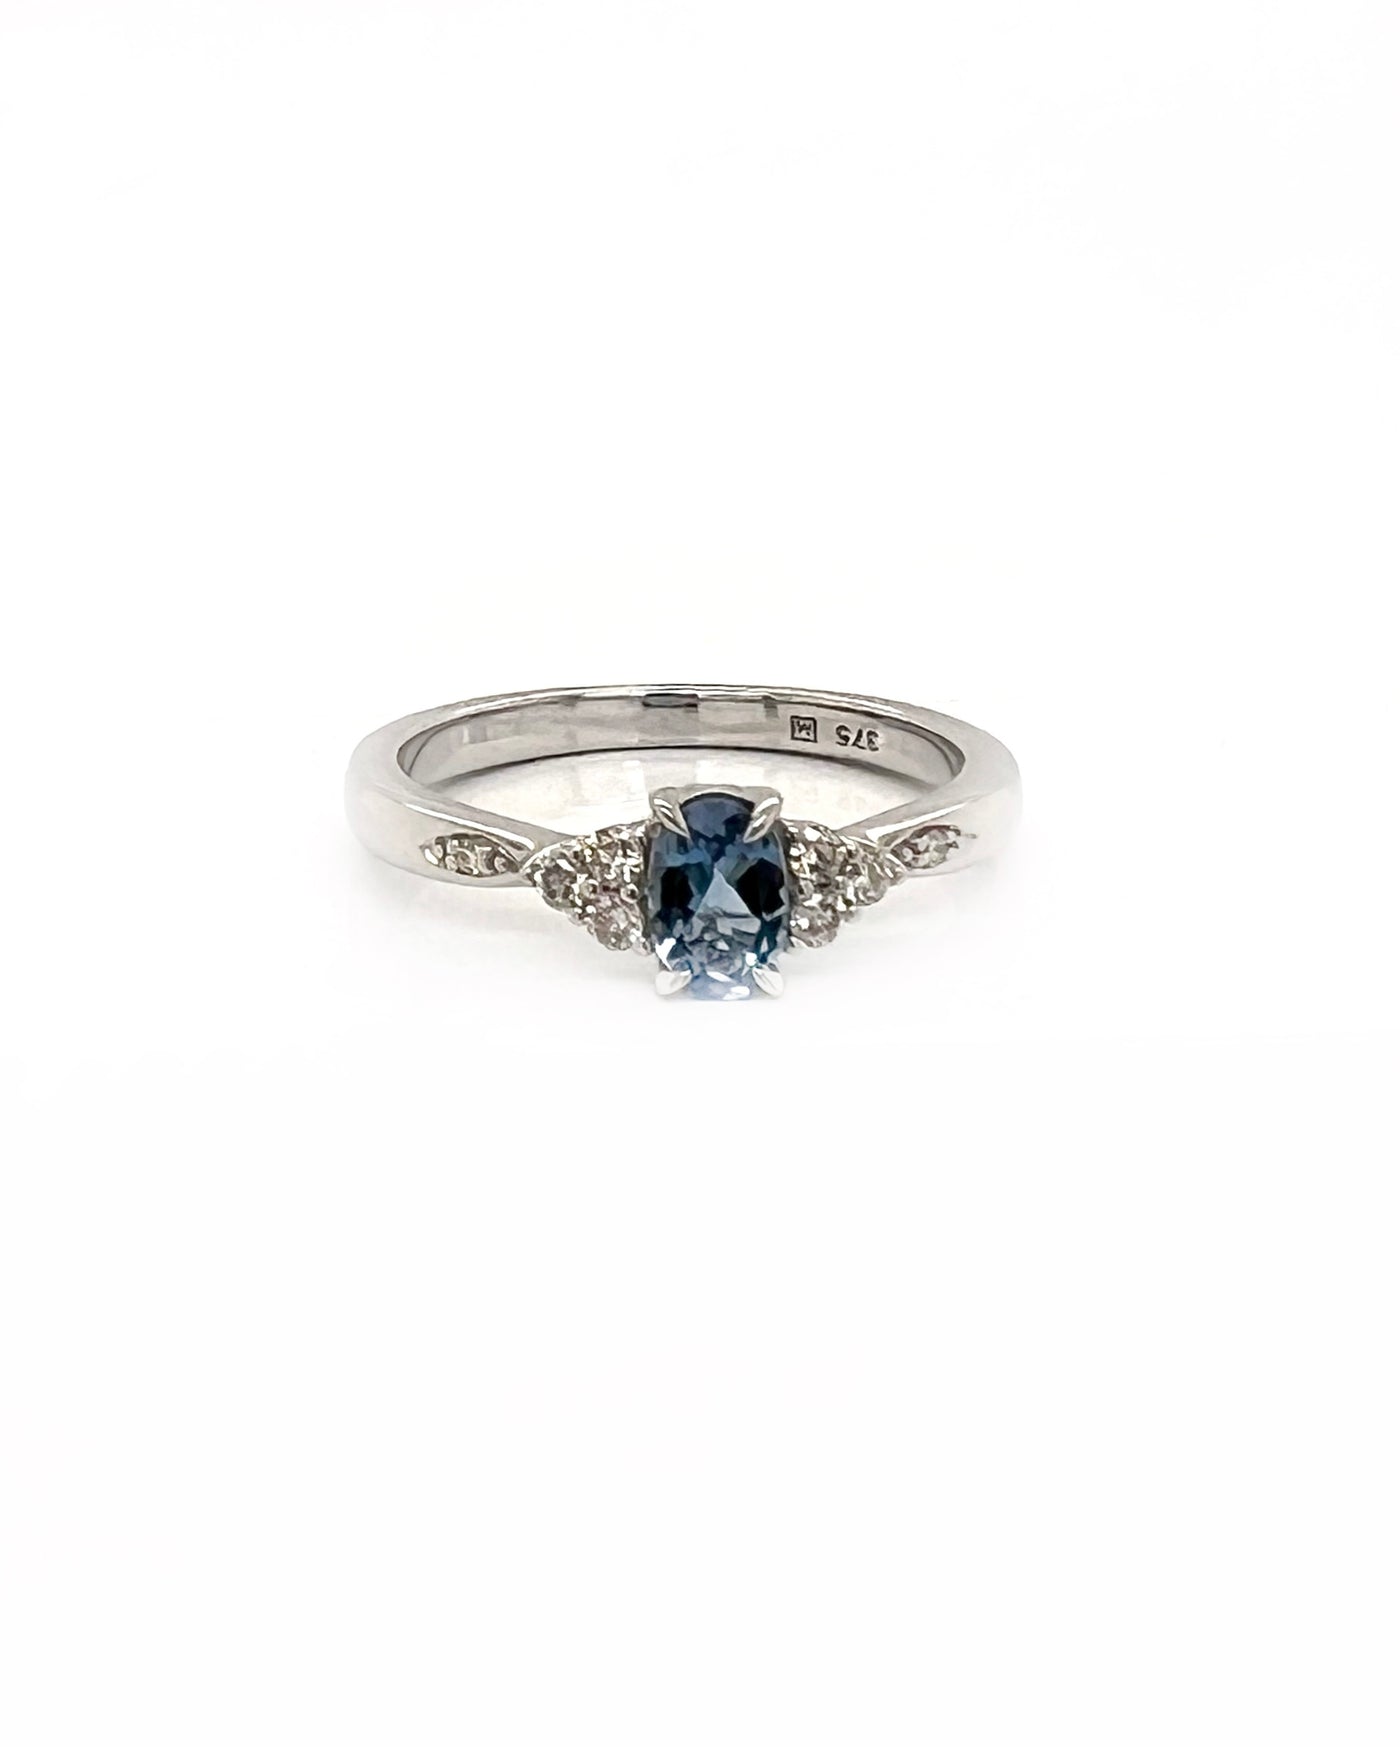 Oval Aquamarine ring with Diamond Shoulders